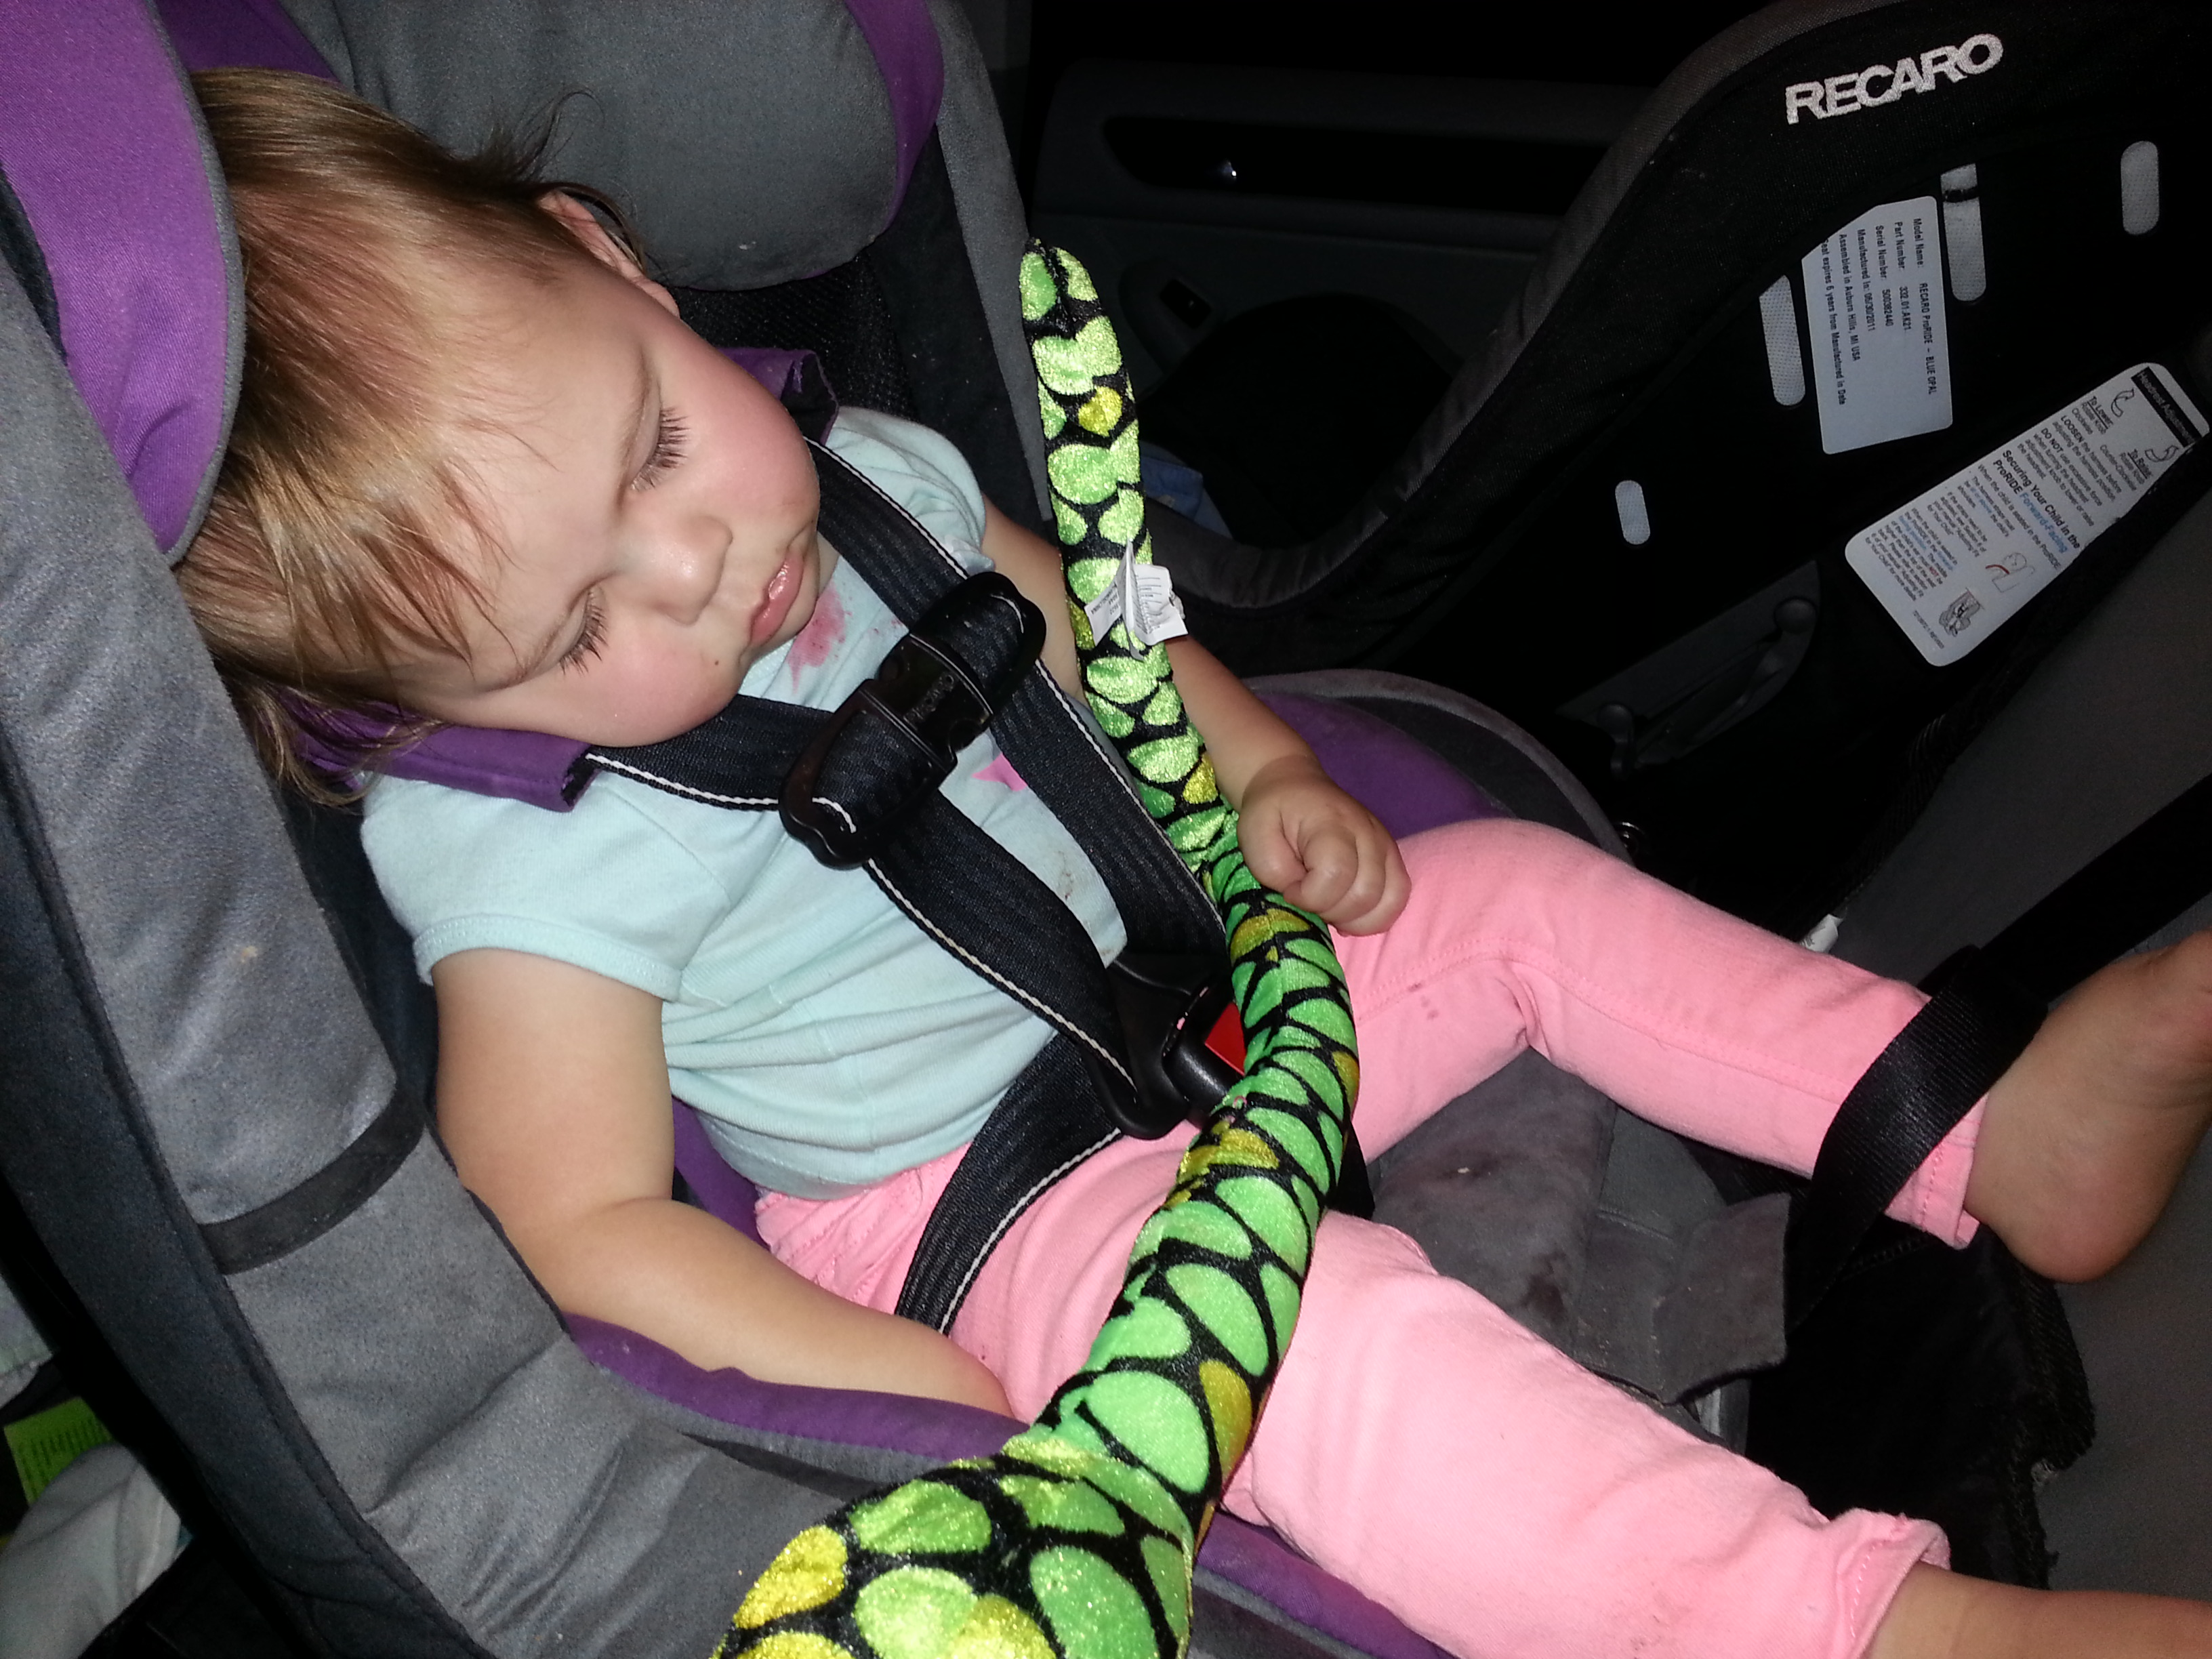 Livia passed out in the car seat